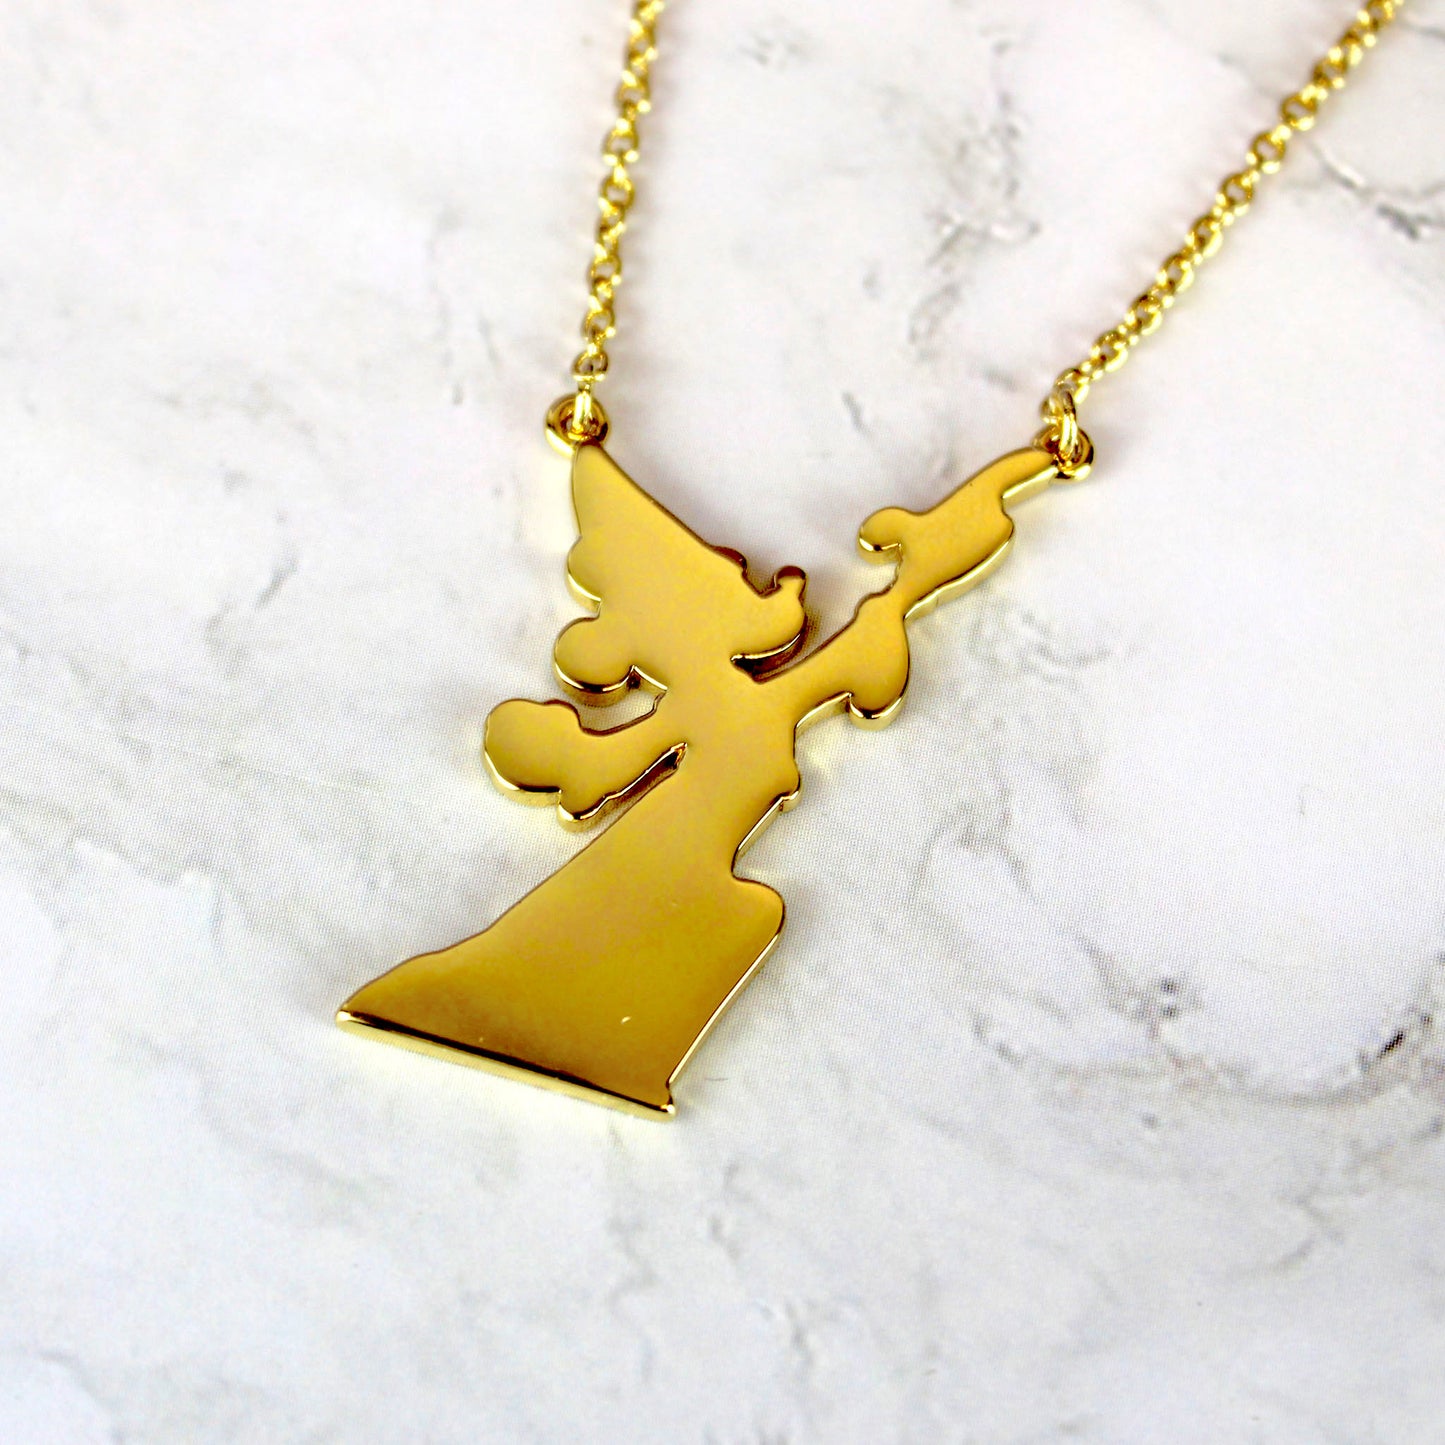 Sorcerer Mickey Mouse (Fantasia) Disney Gold Plated Silhouette Necklace